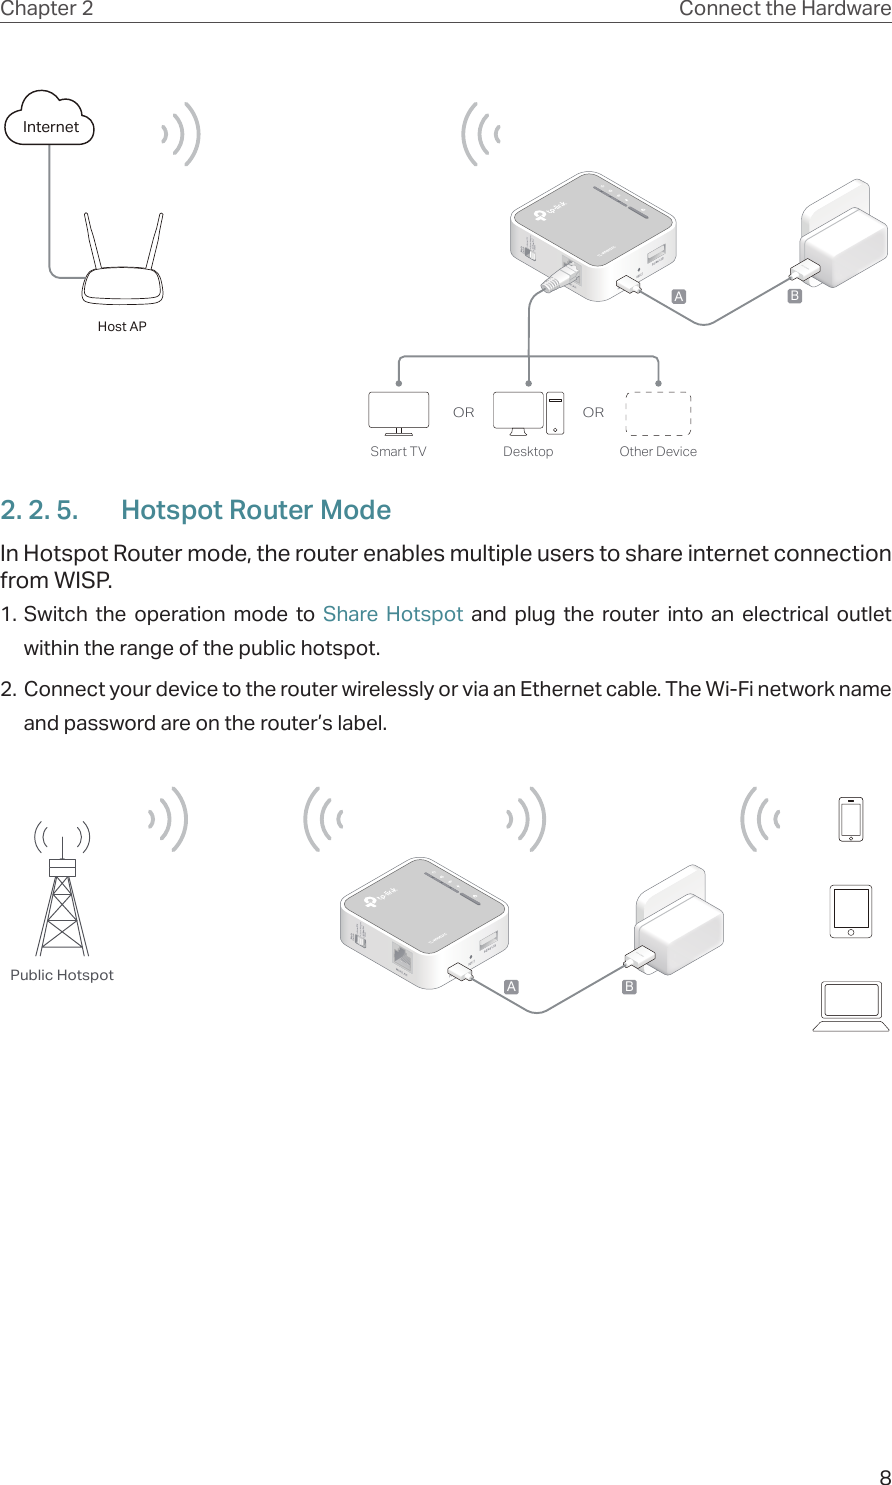 8Chapter 2 Connect the HardwareInternetOR ORABOther DeviceSmart TV DesktopHost AP2. 2. 5.  Hotspot Router ModeIn Hotspot Router mode, the router enables multiple users to share internet connection from WISP.1. Switch the operation mode to Share Hotspot and plug the router into an electrical outlet within the range of the public hotspot.2. Connect your device to the router wirelessly or via an Ethernet cable. The Wi-Fi network name and password are on the router’s label.ABPublic Hotspot